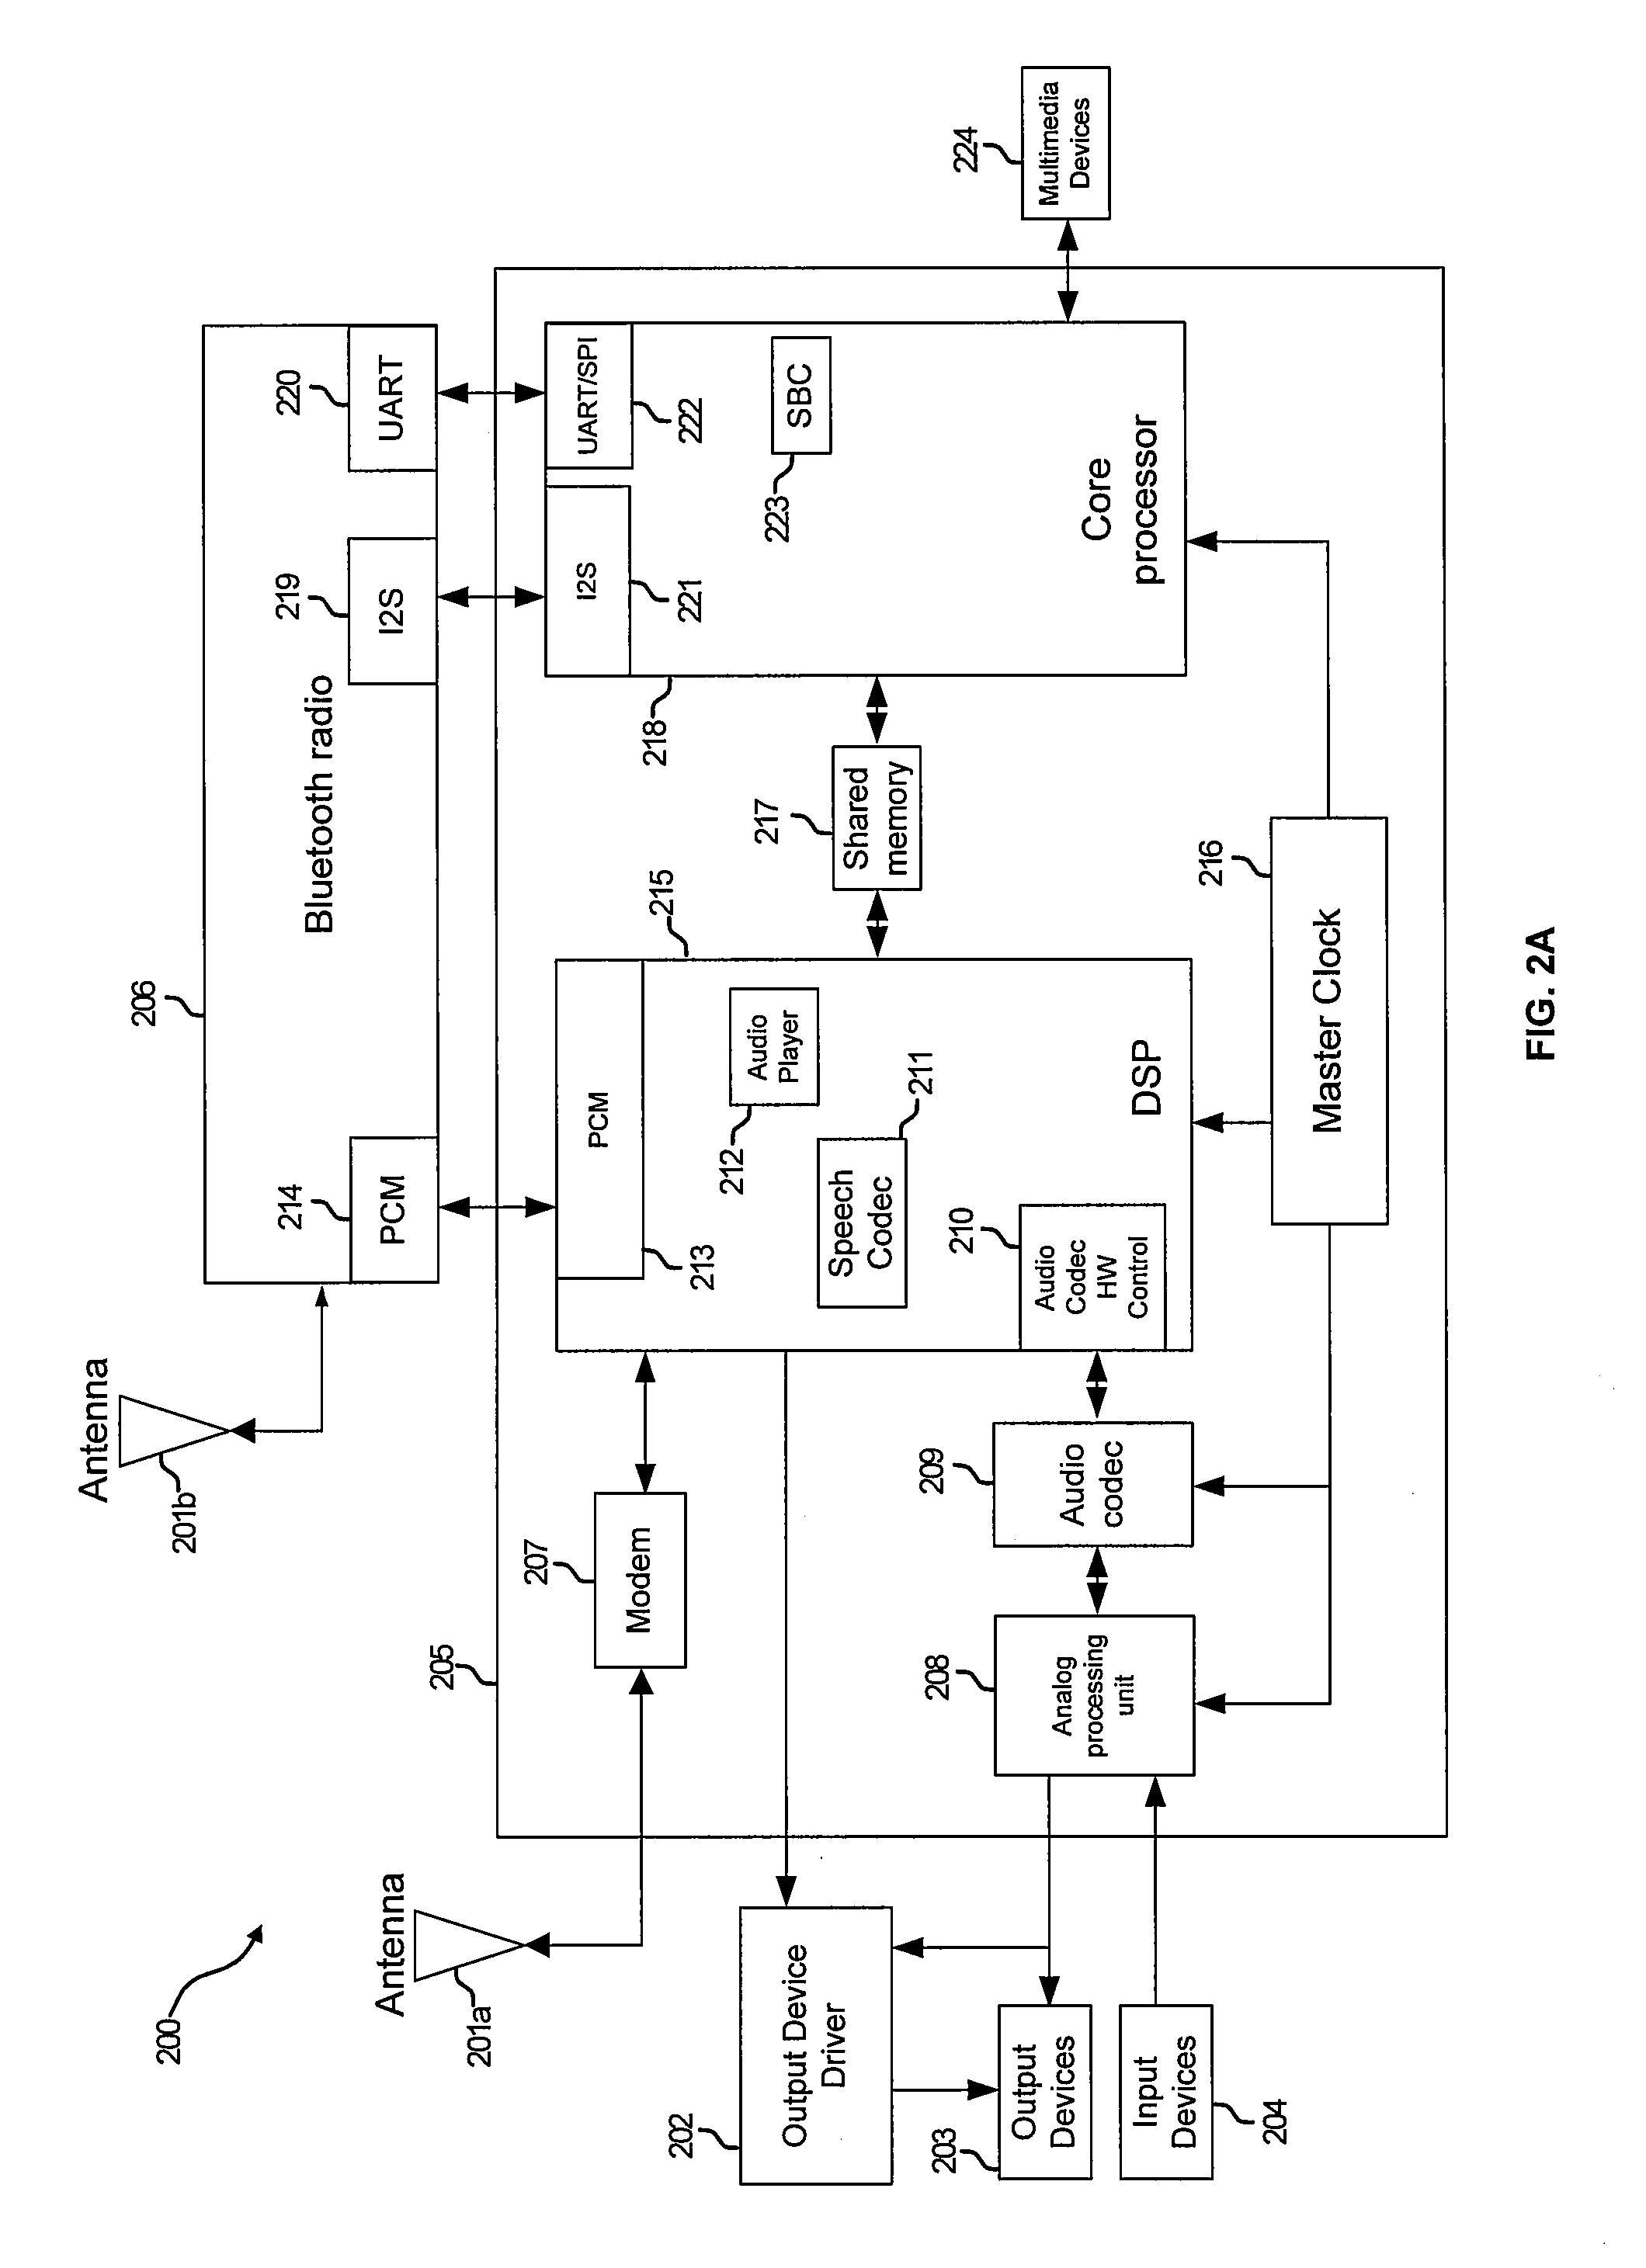 Method and System for Detecting, and Controlling Power for, an Auxiliary Microphone